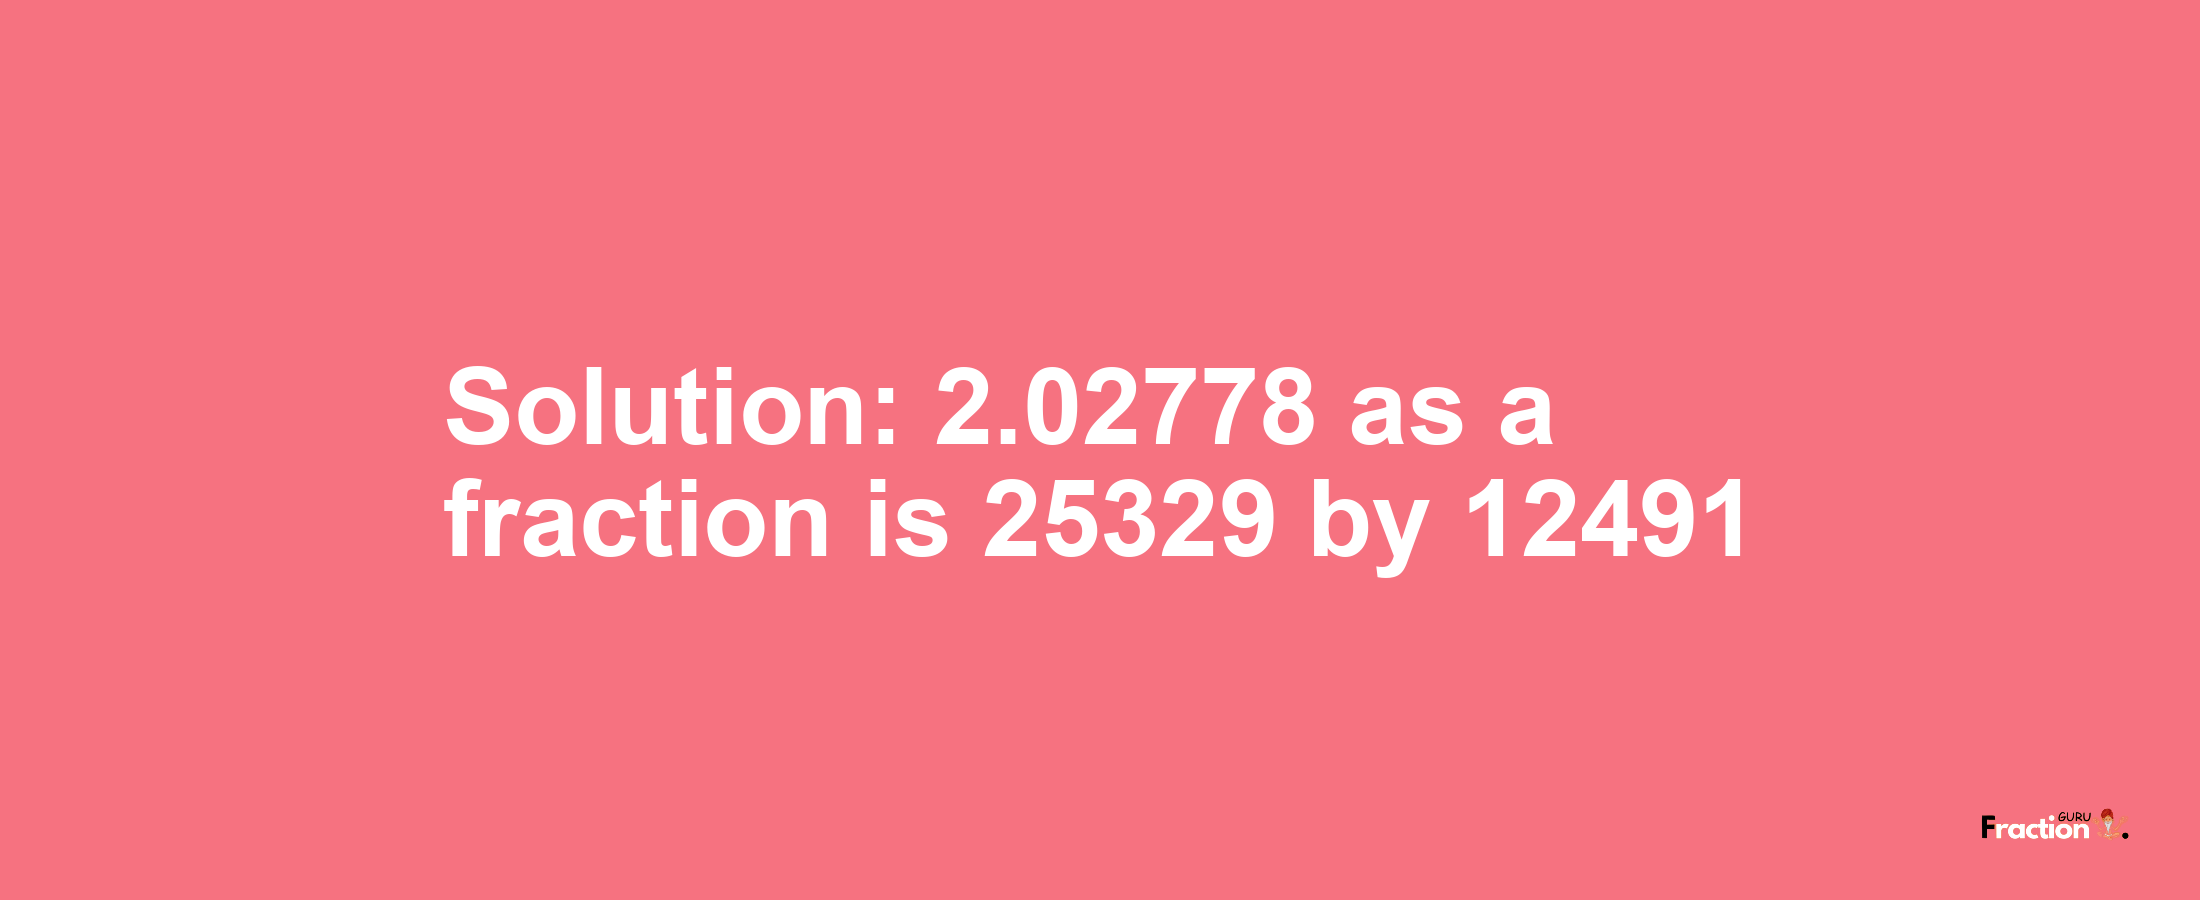 Solution:2.02778 as a fraction is 25329/12491